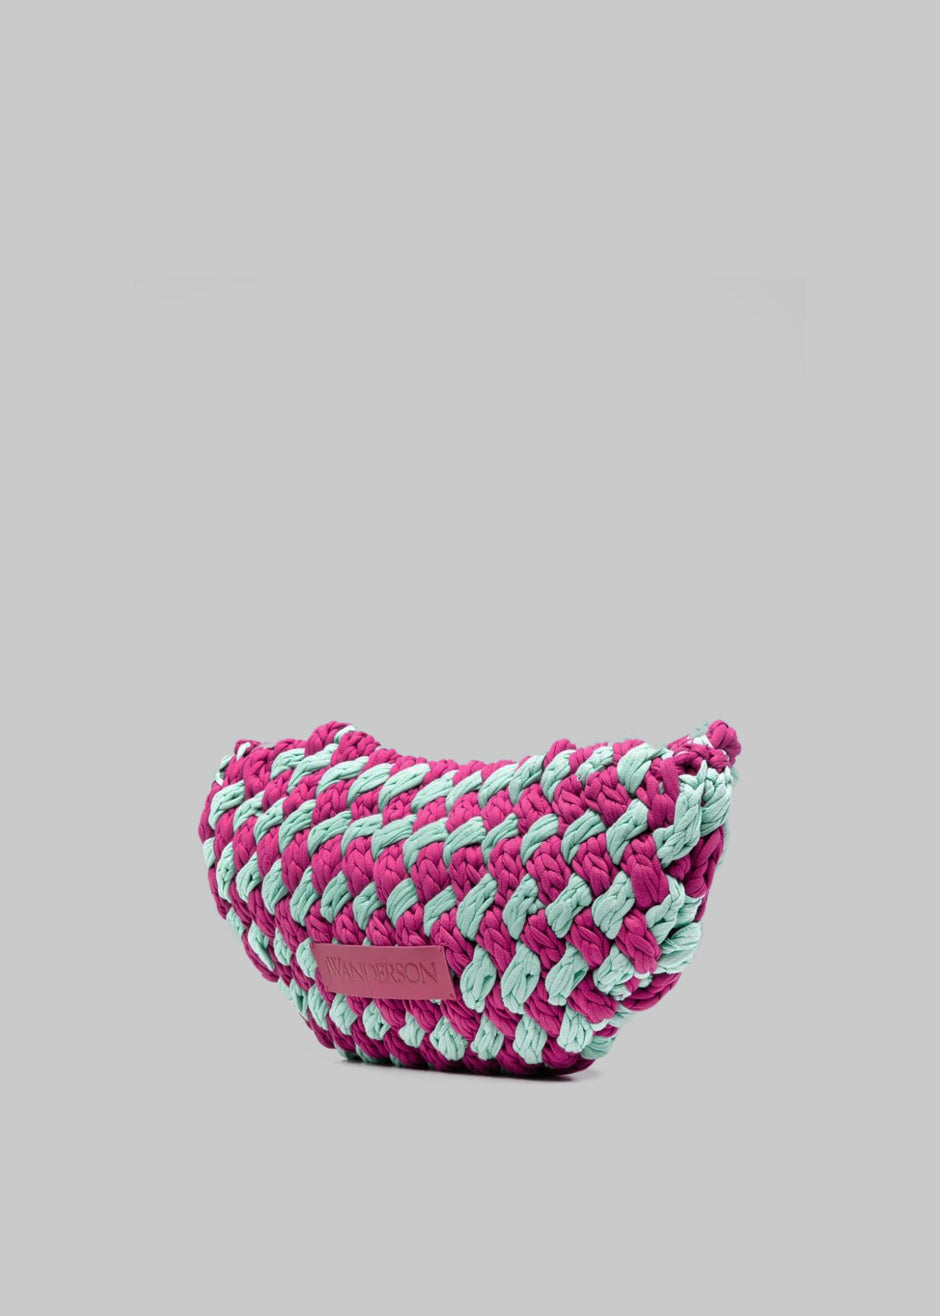 JW Anderson Knitted Bum Bag - Purple/Mint - 2